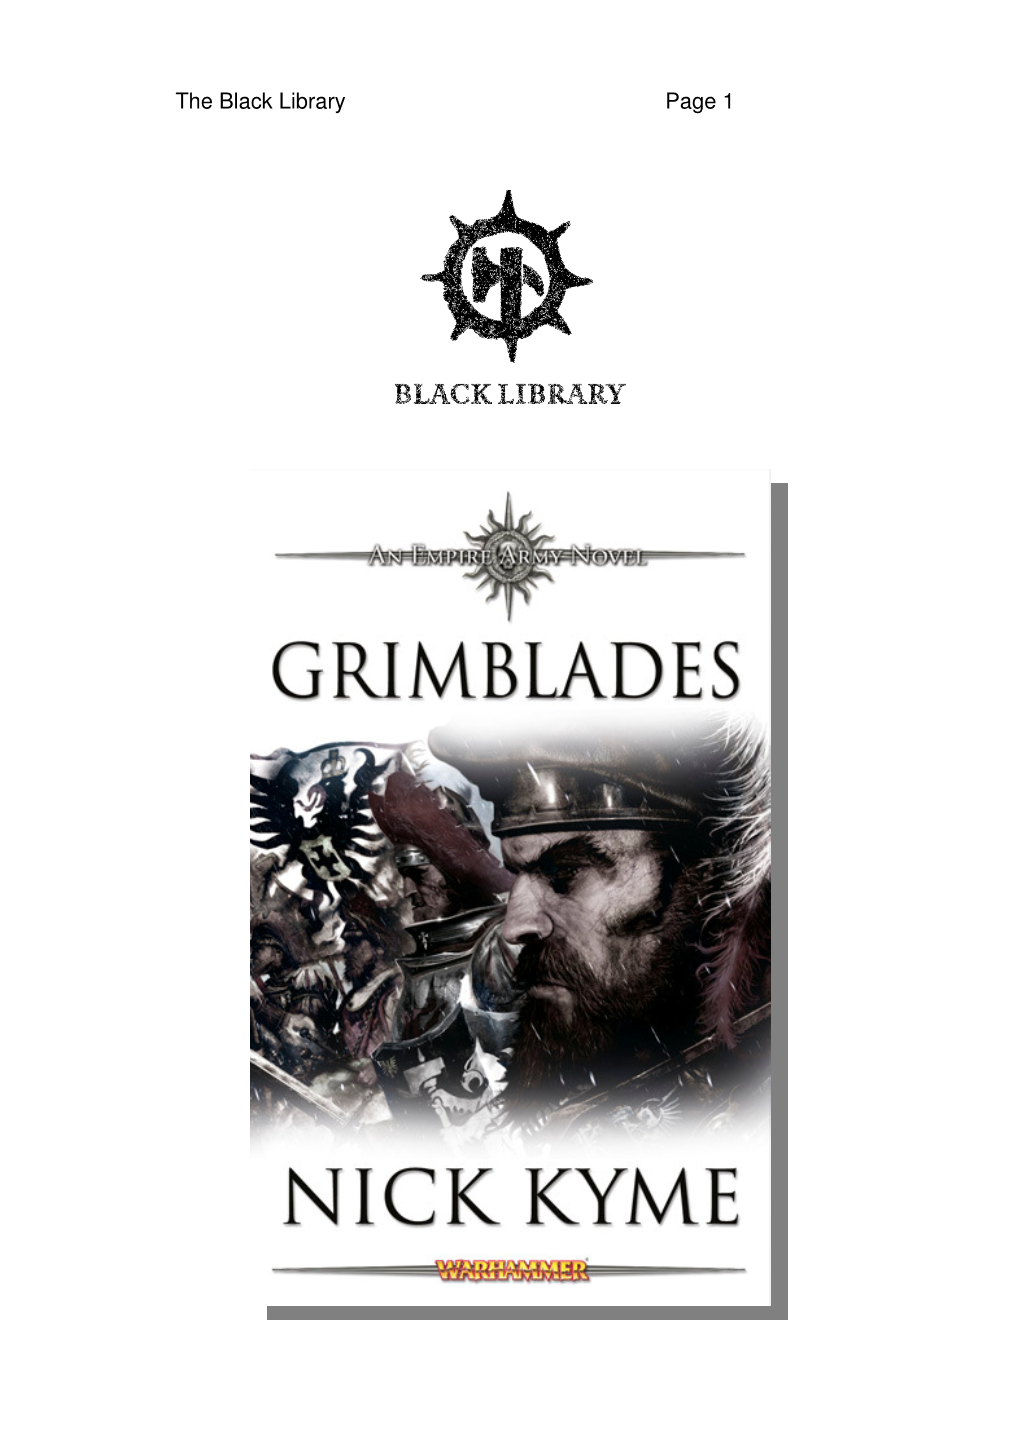 GRIMBLADES an Empire Army Novel by Nick Kyme